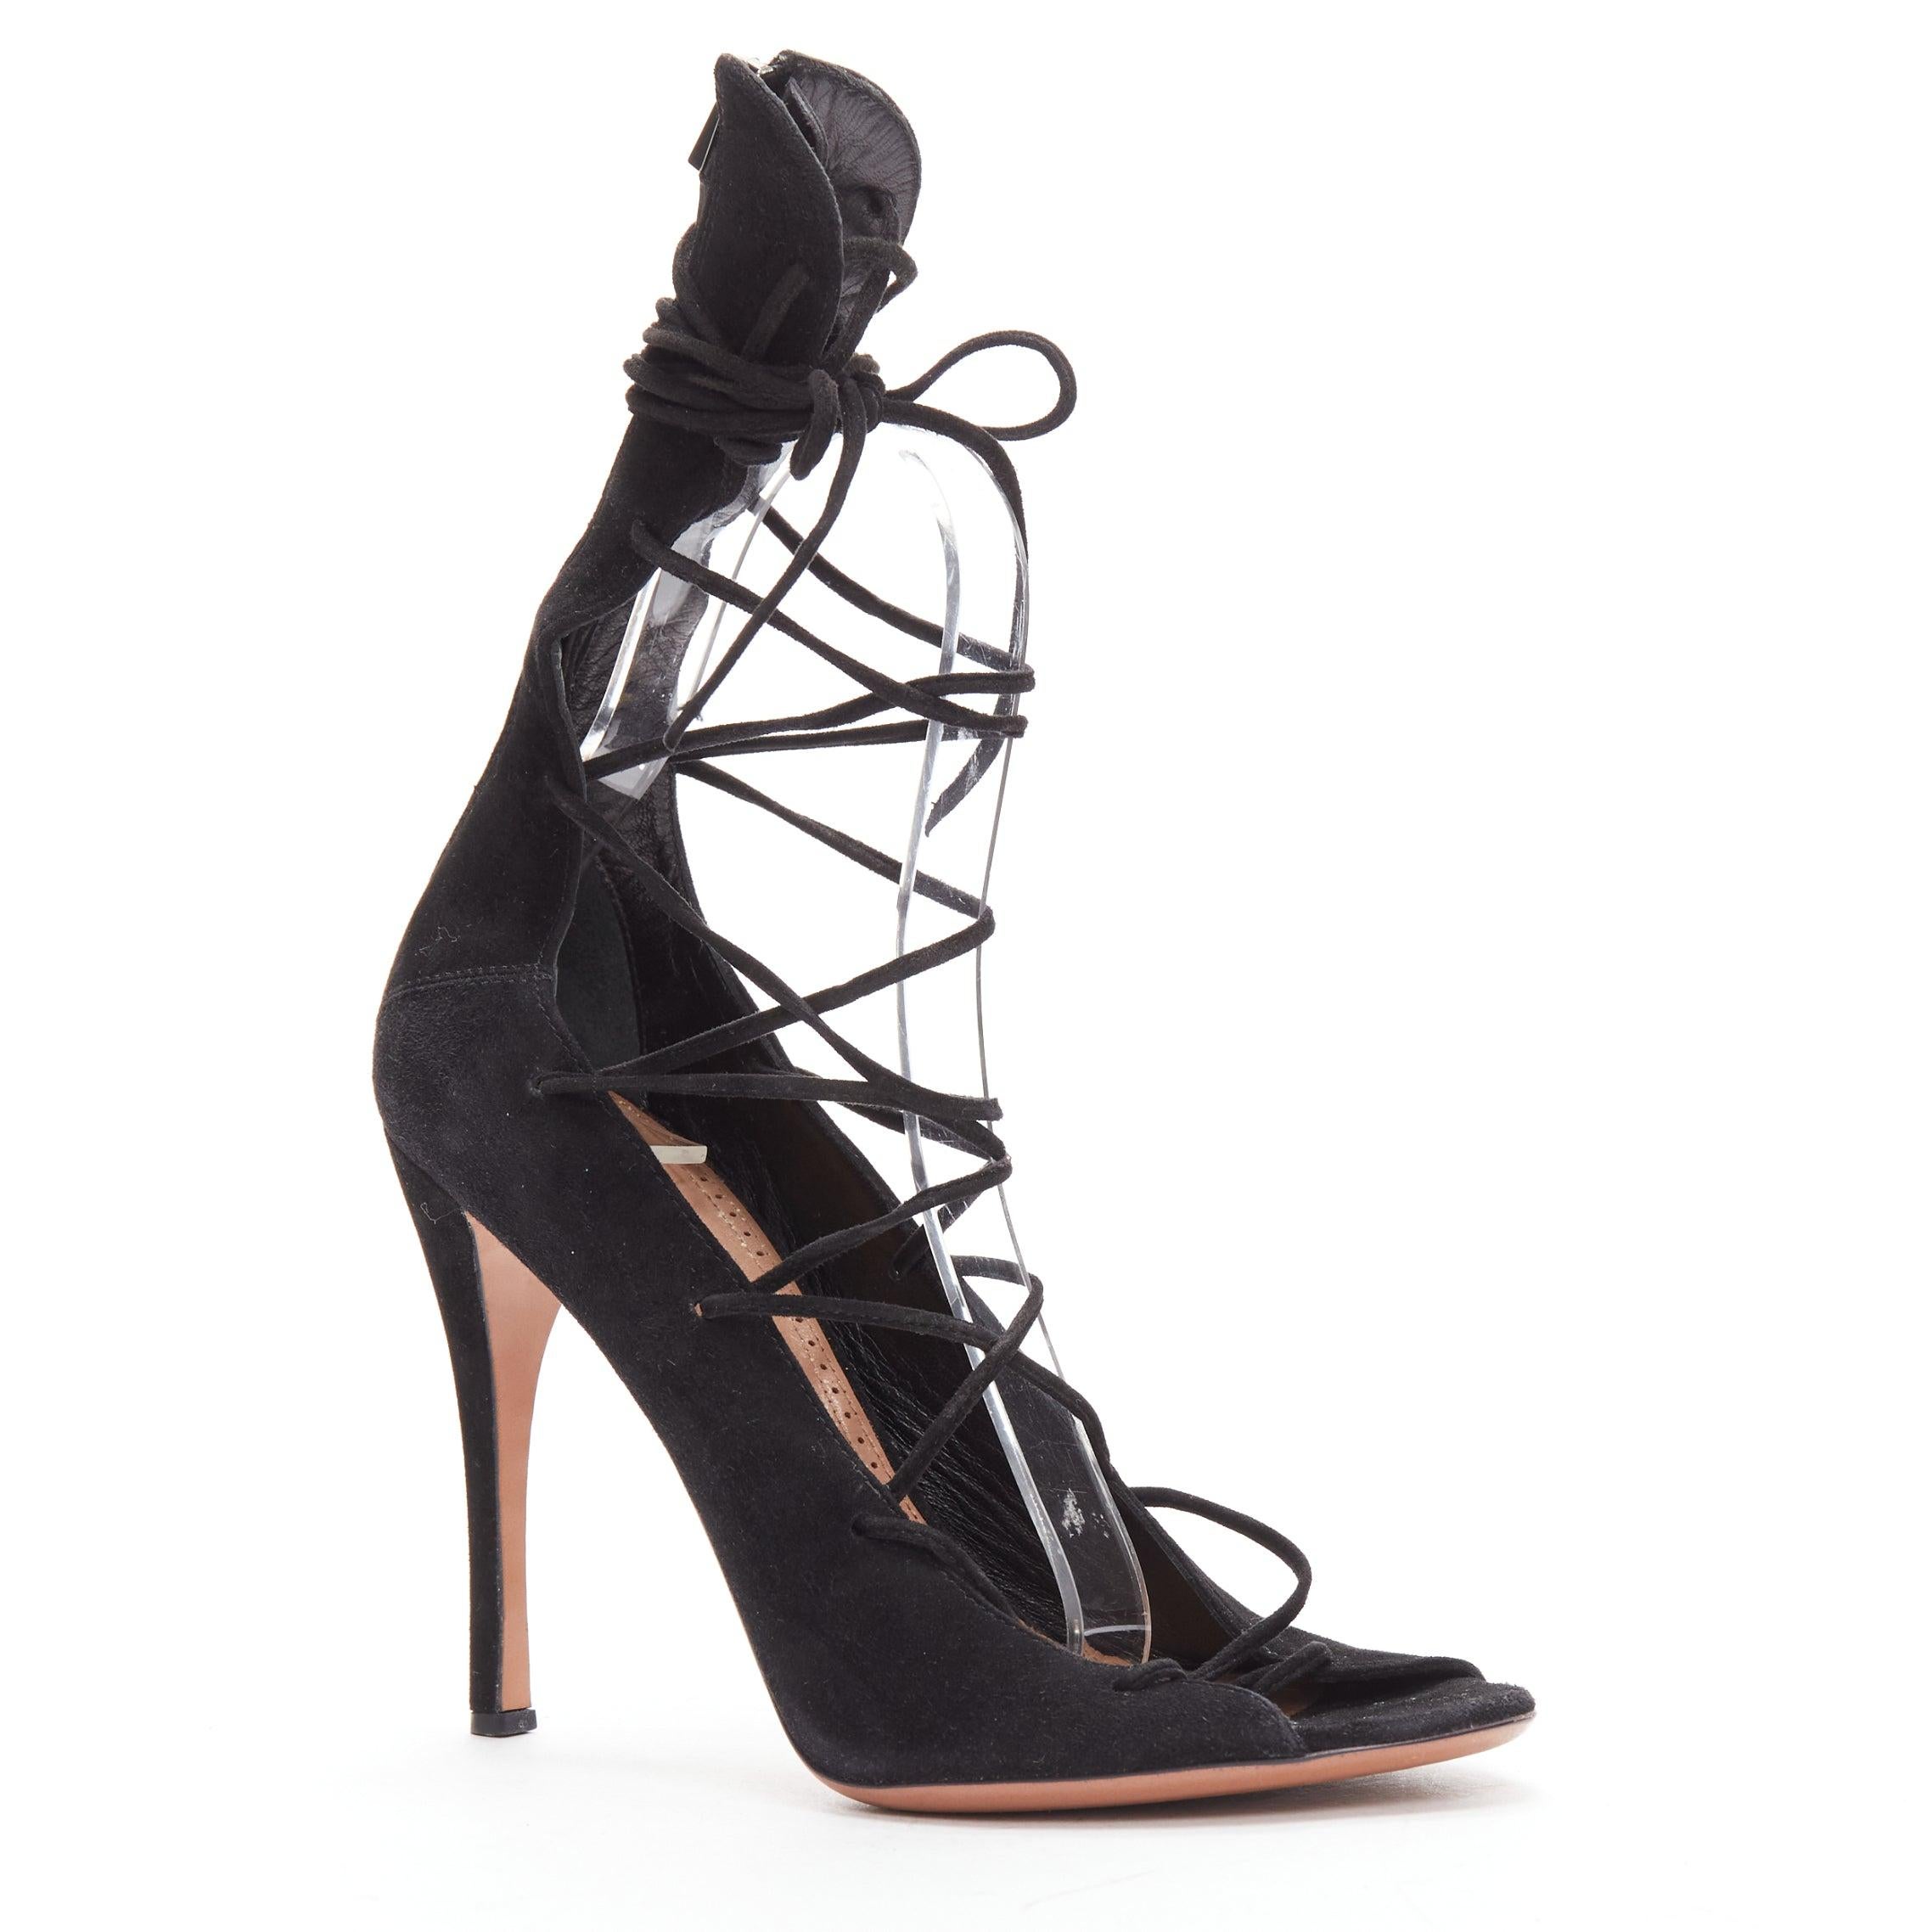 ALAIA black suede leather lace up back zip strappy sandal heels EU38.5
Reference: BSHW/A00141
Brand: Alaia
Designer: Azzedine Alaia
Material: Leather
Color: Black
Pattern: Solid
Closure: Lace Up
Lining: Nude Leather
Extra Details: Stiletto heels